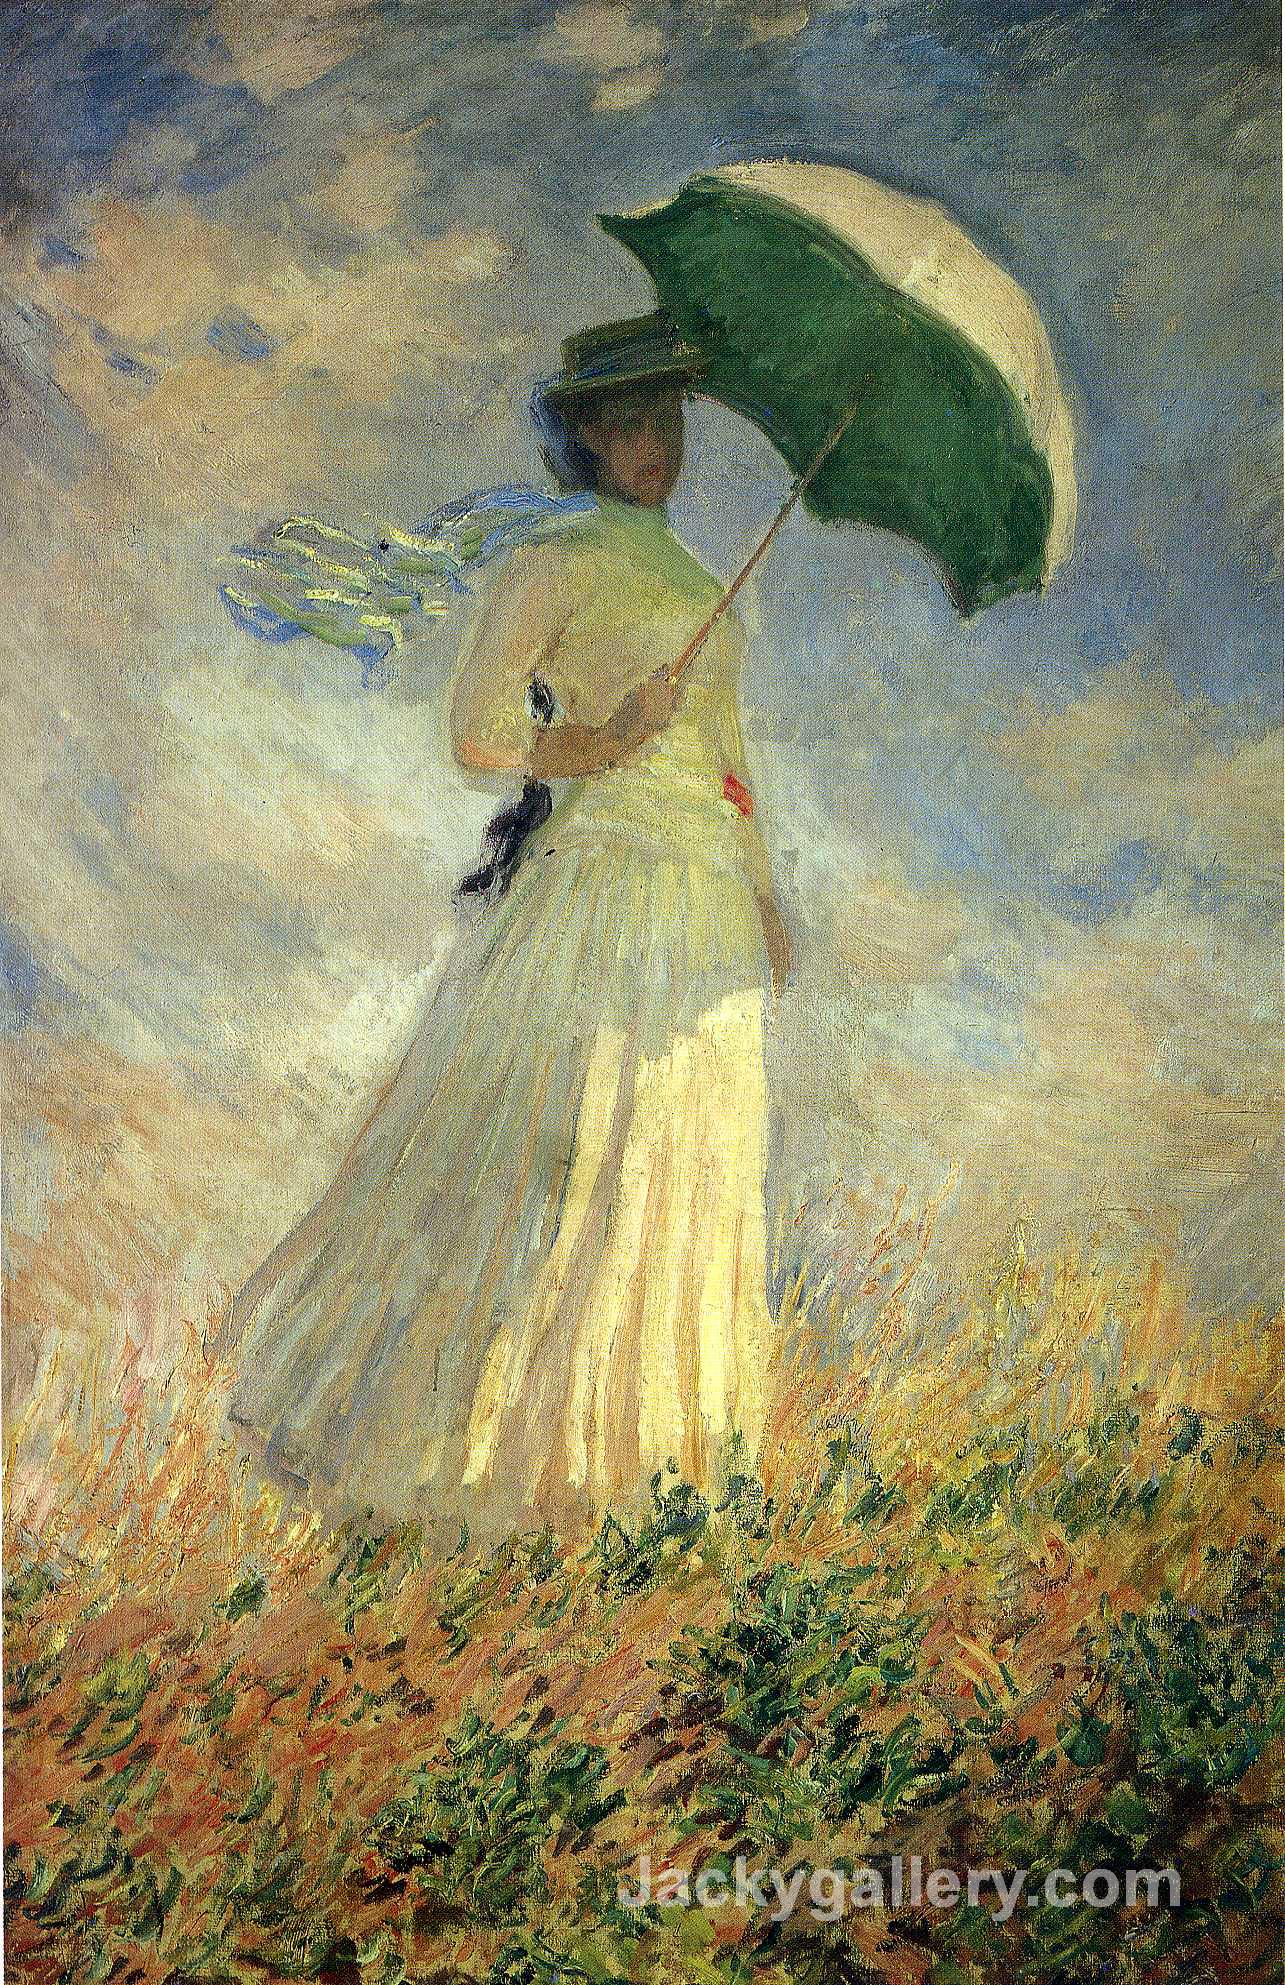 Woman with a Parasol, Facing Right (also known as Study of a Figure Outdoors (Facing Right)) by Claude Monet paintings reproduction